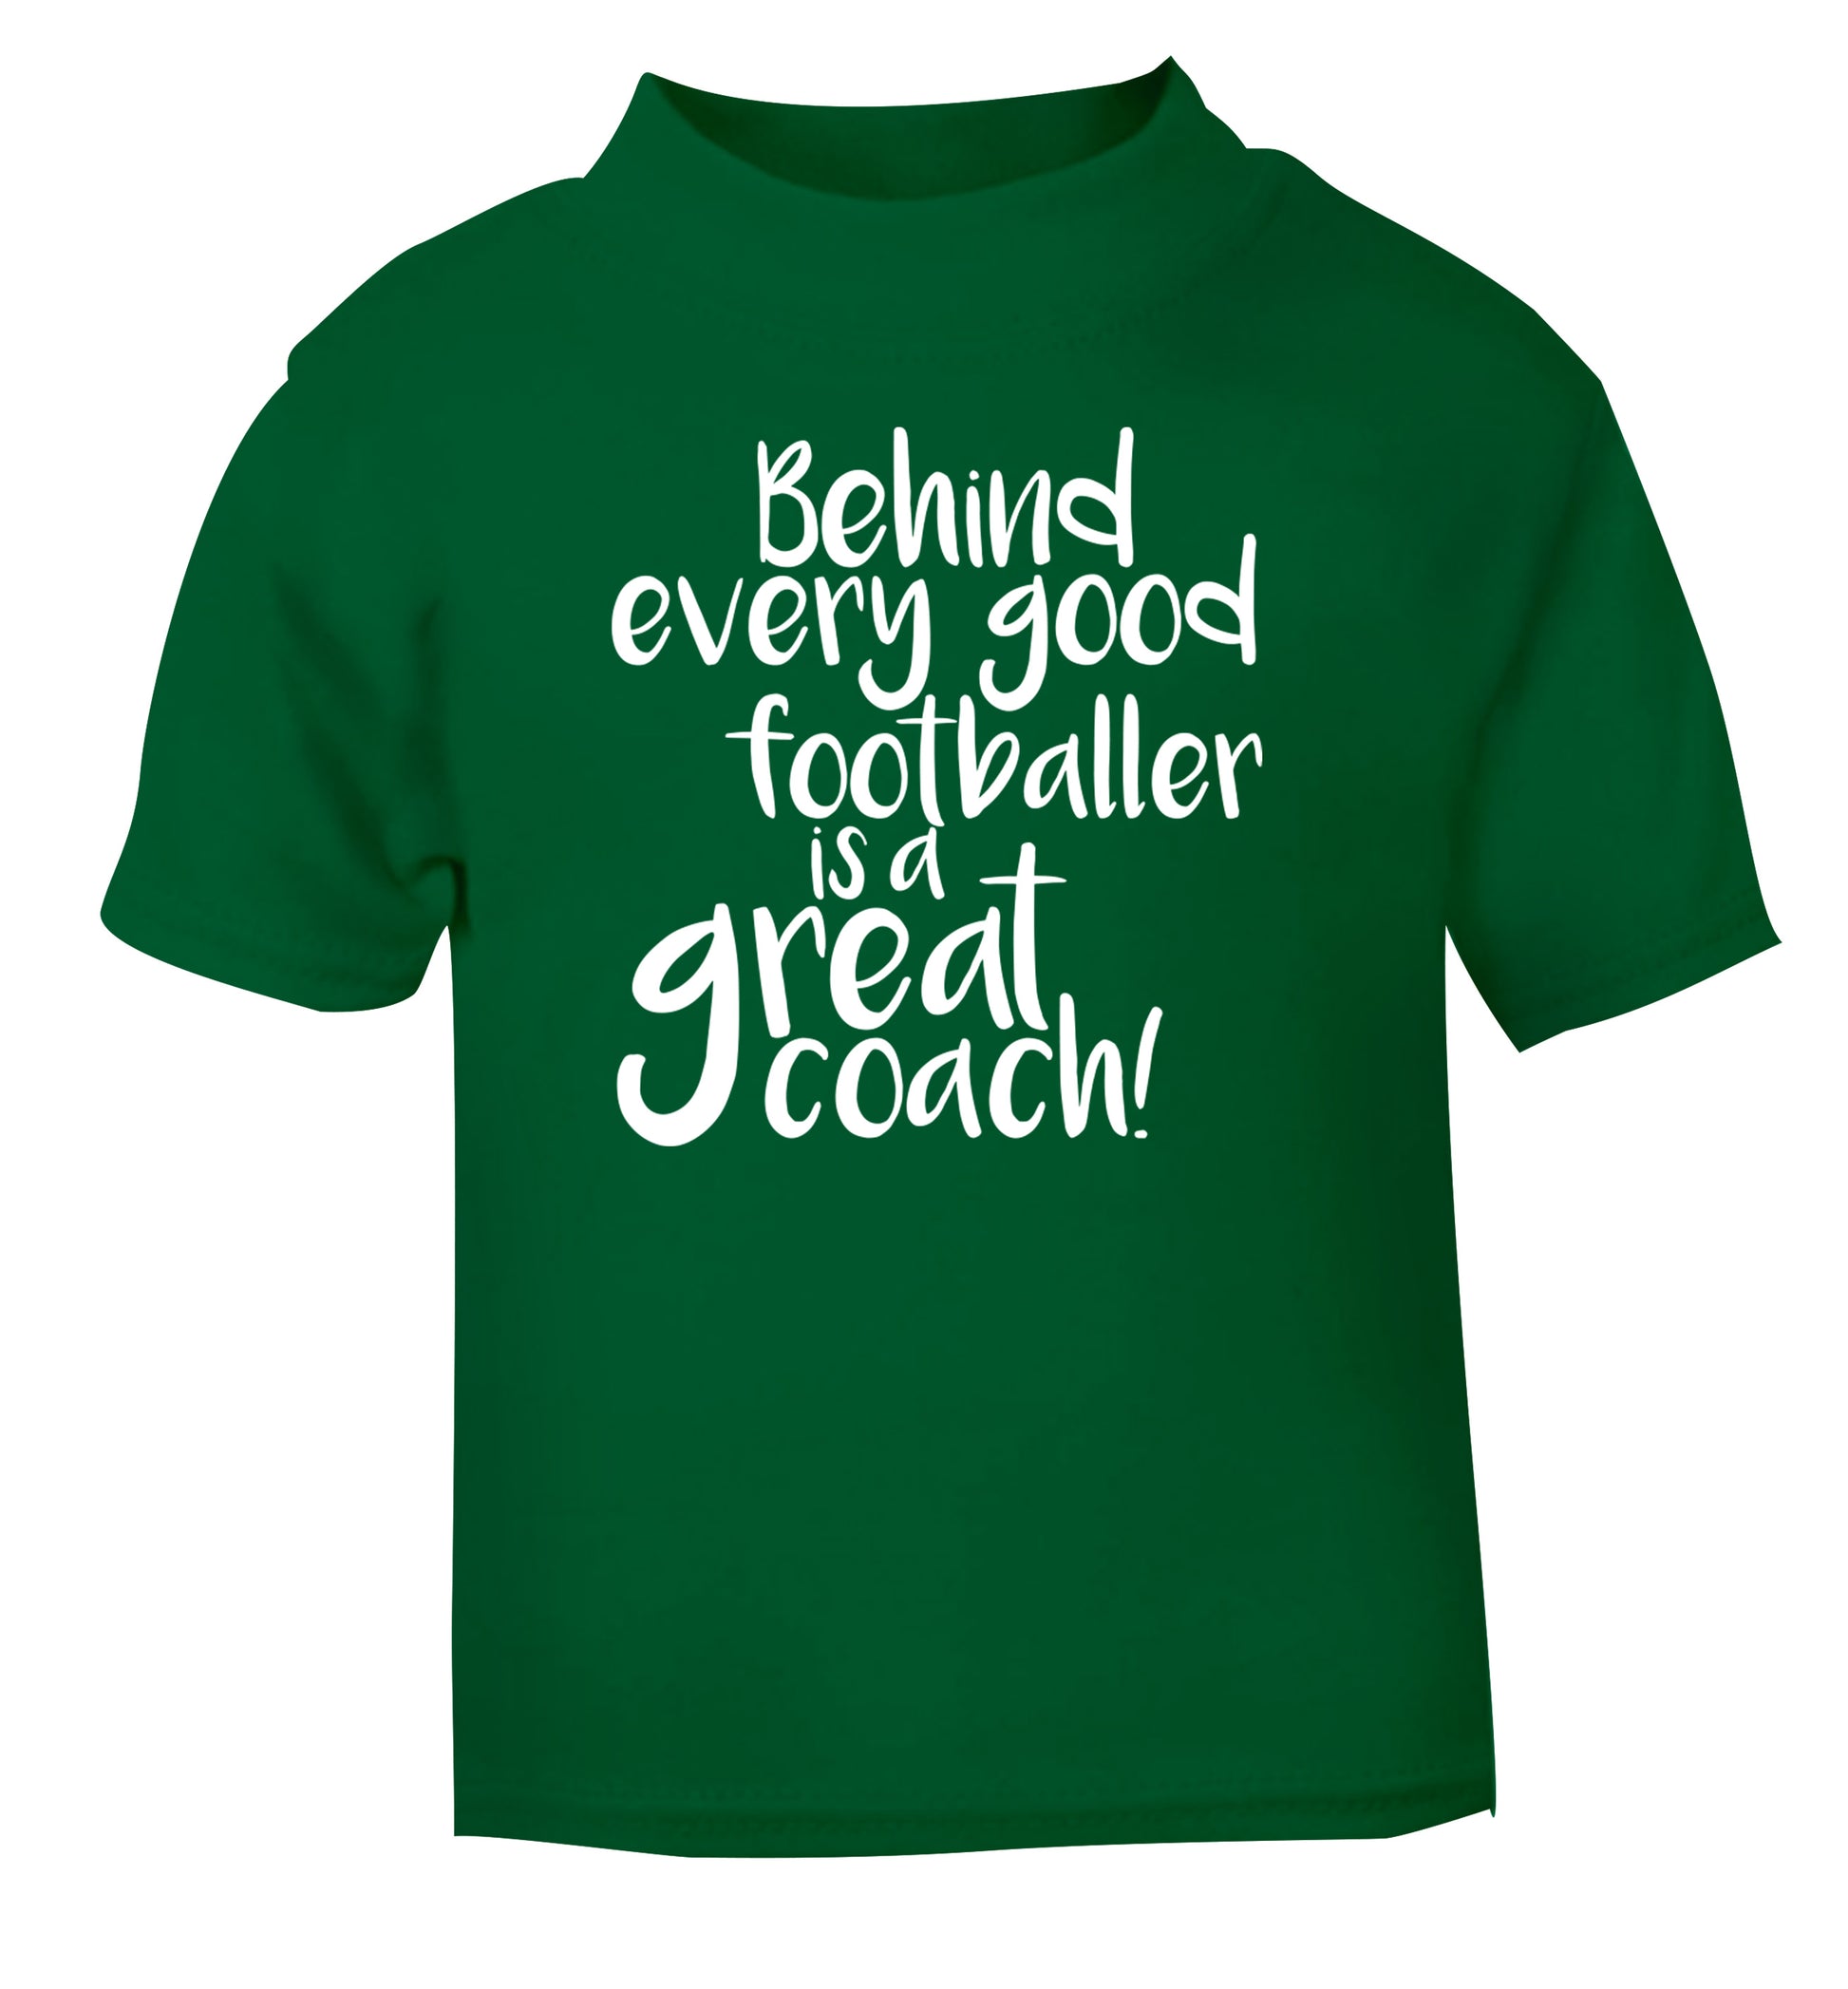 Behind every good footballer is a great coach! green Baby Toddler Tshirt 2 Years